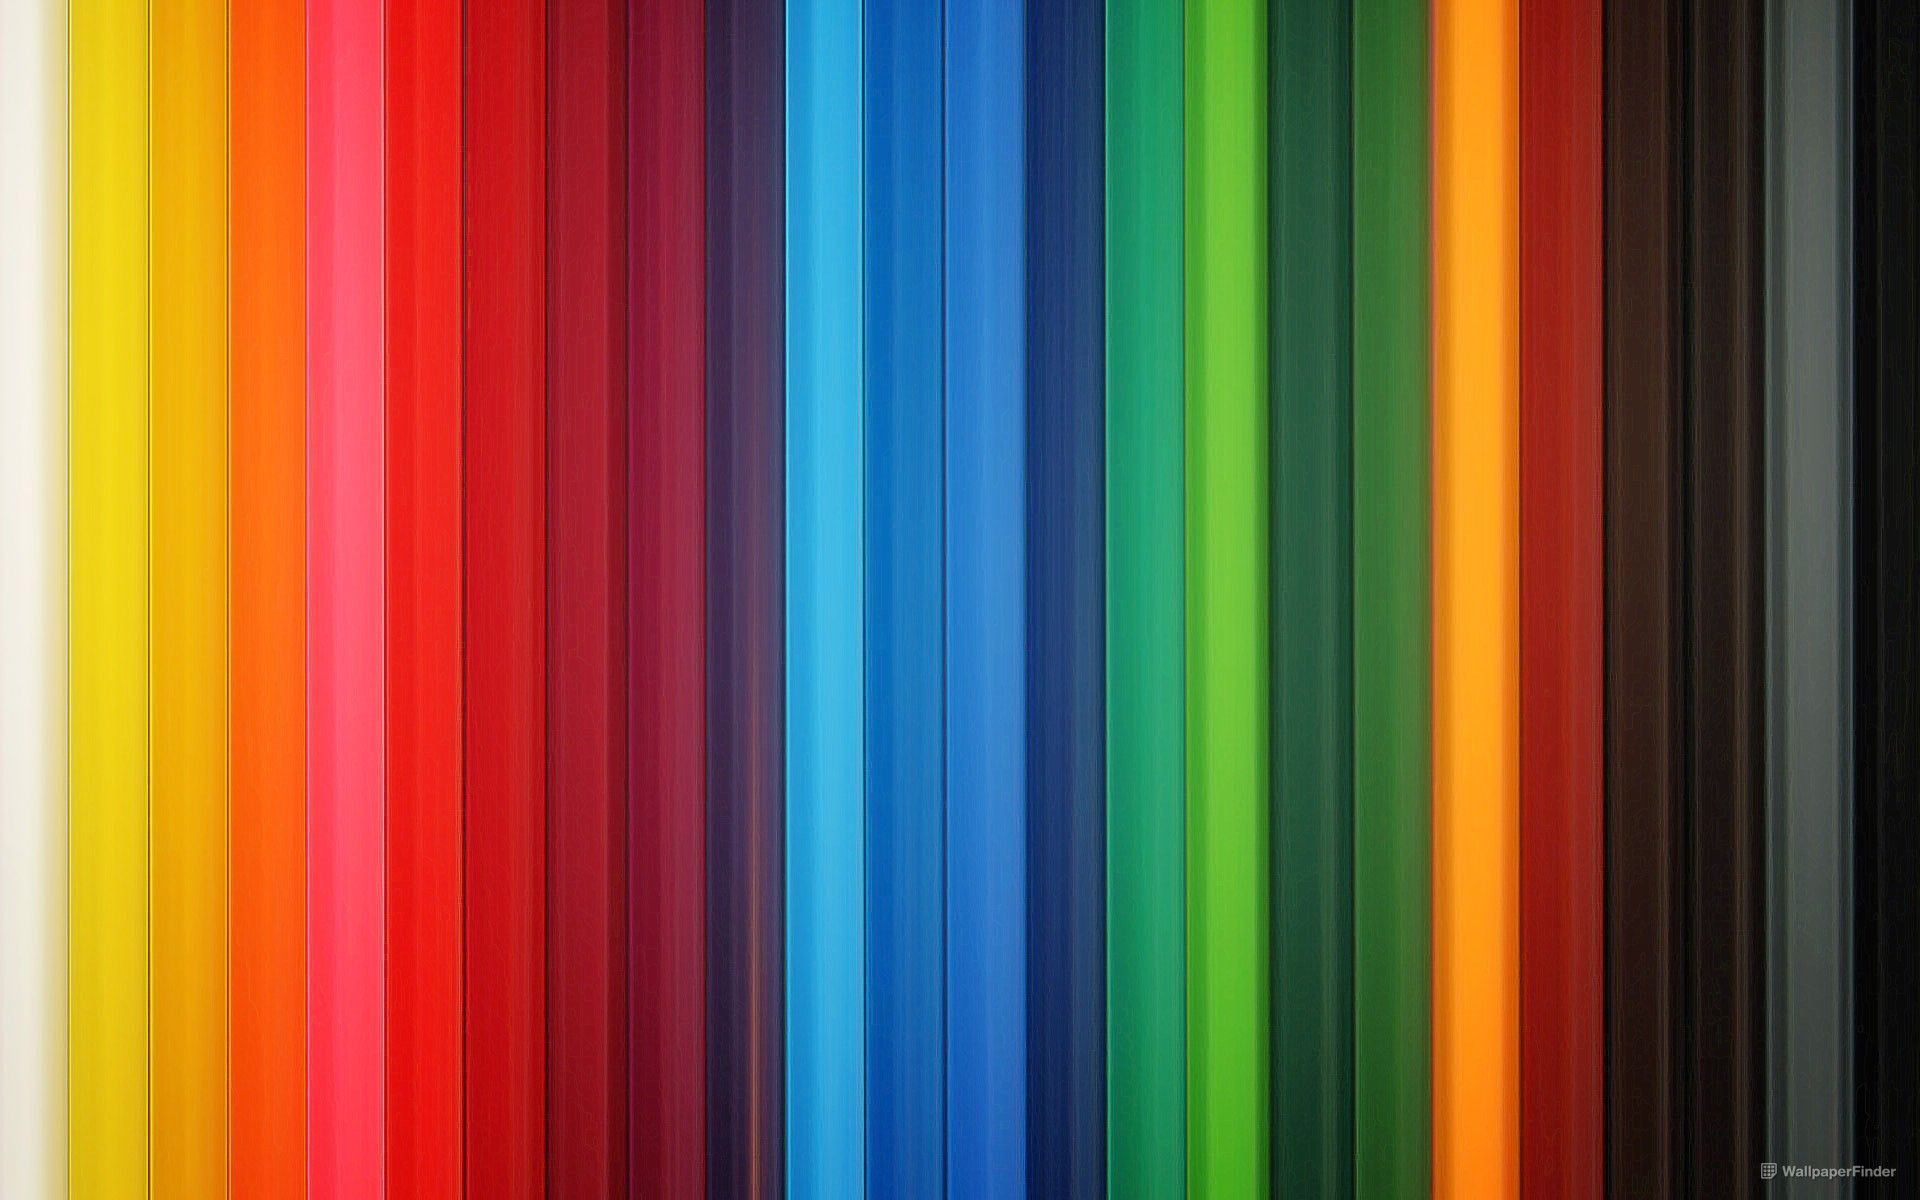 40 Wallpapers loaded with color | Webdesigner Depot